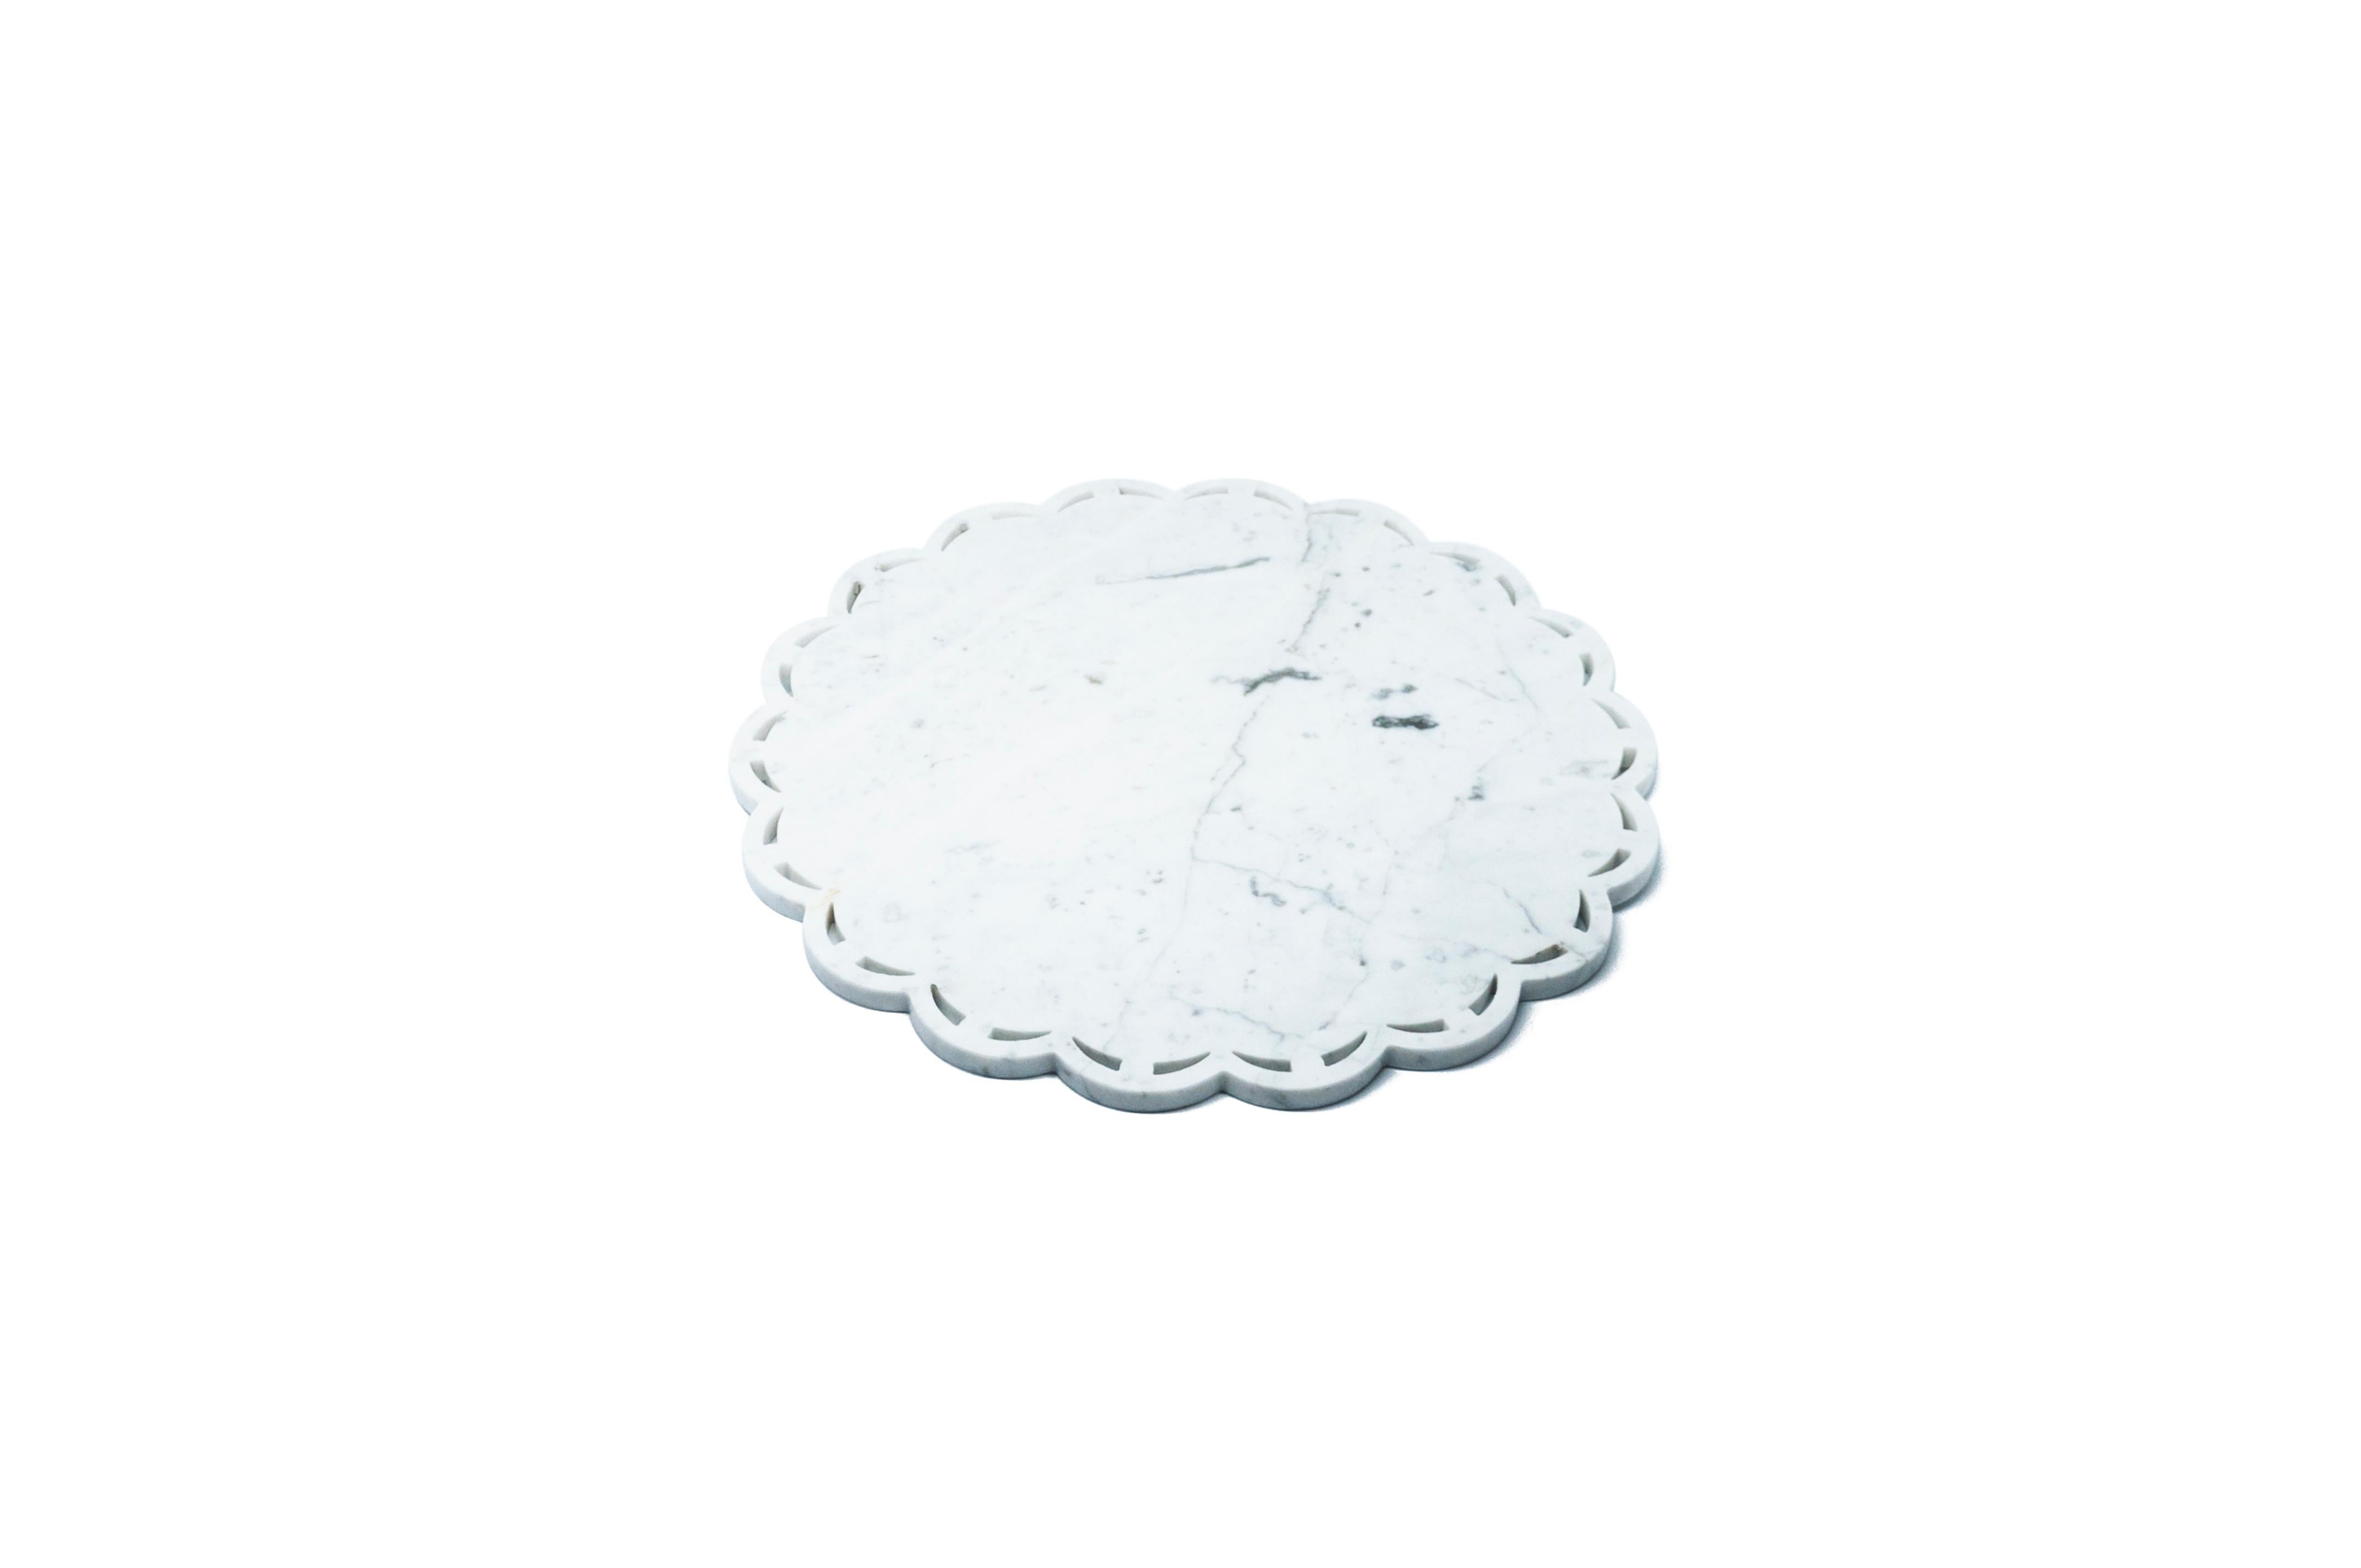 Round marble tray or plate with lace edge in grey/white/black marble. Each piece is in a way unique (every marble block is different in veins and shades) and handmade by Italian artisans specialized over generations in processing marble. Slight